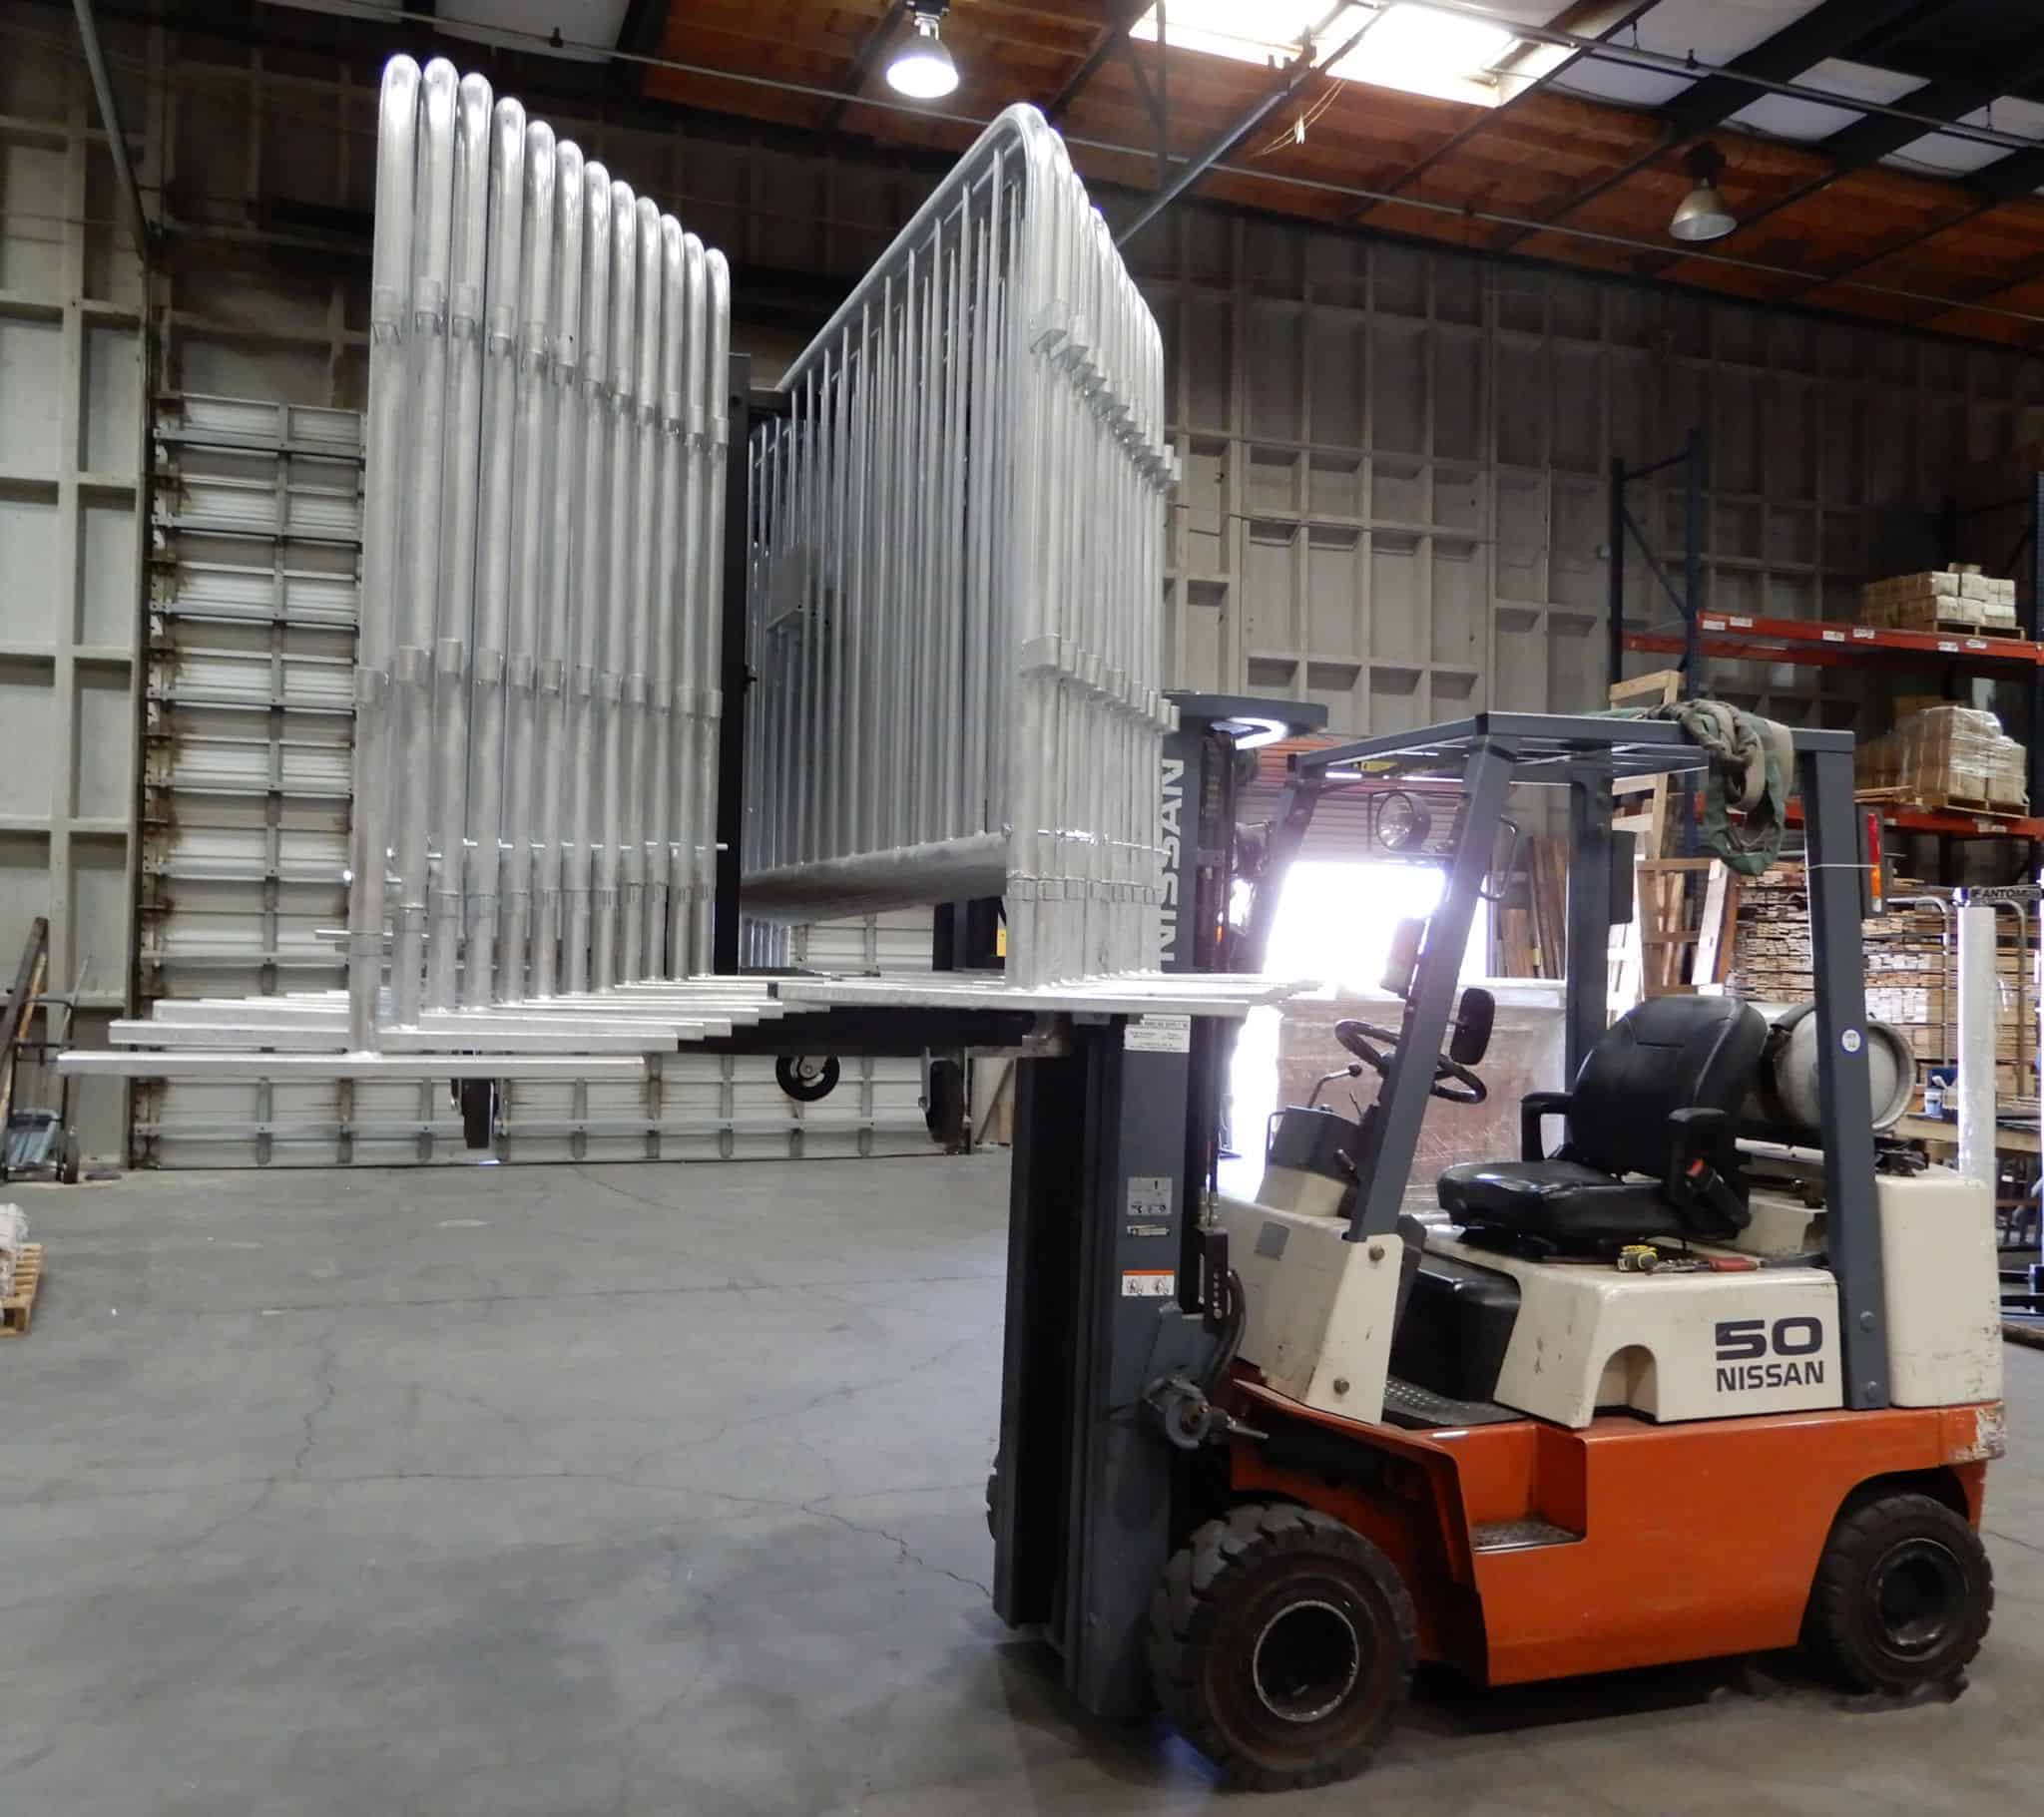 Barriers on fork lift